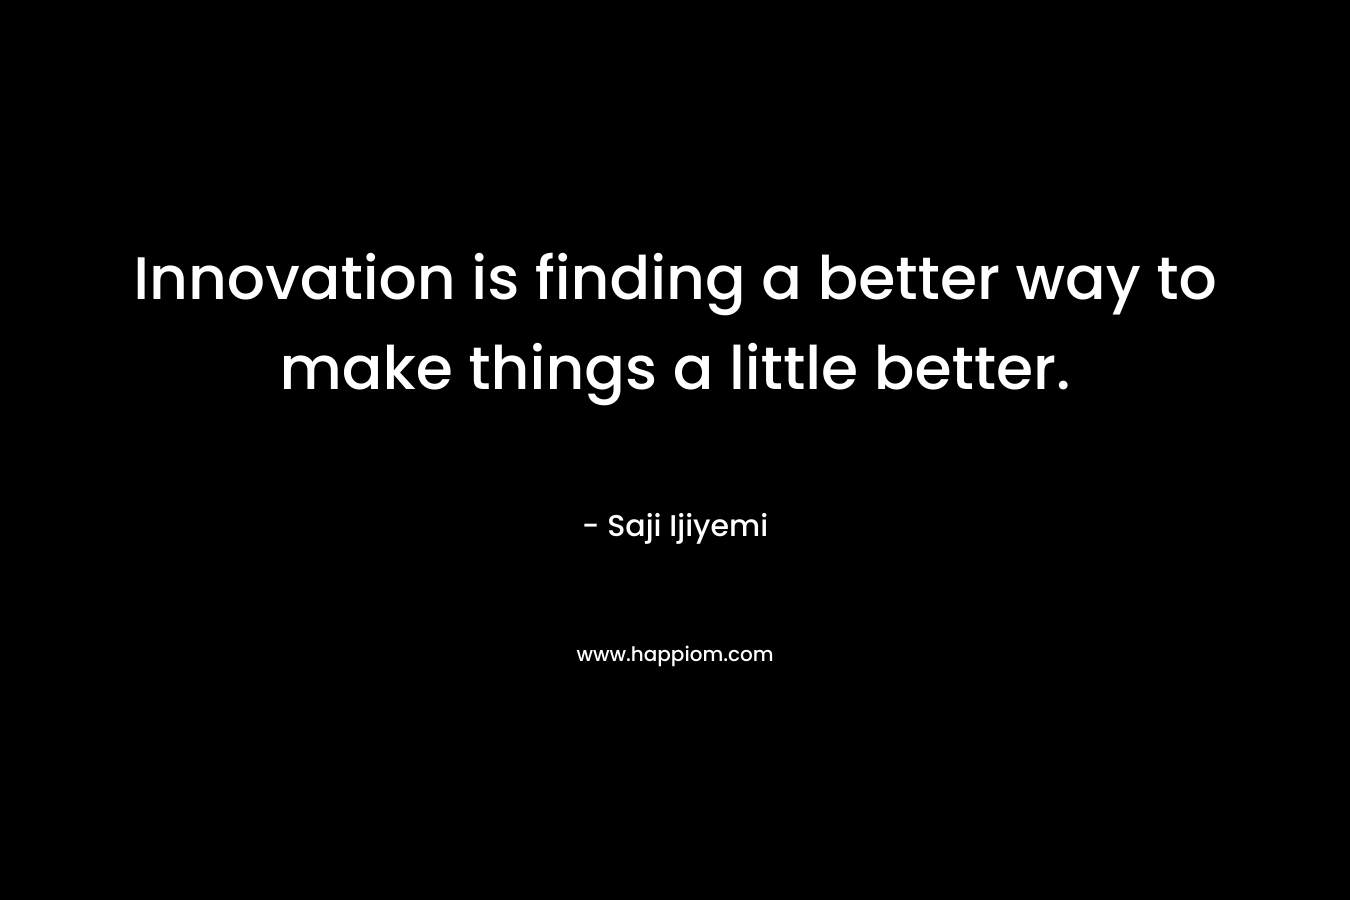 Innovation is finding a better way to make things a little better. – Saji Ijiyemi